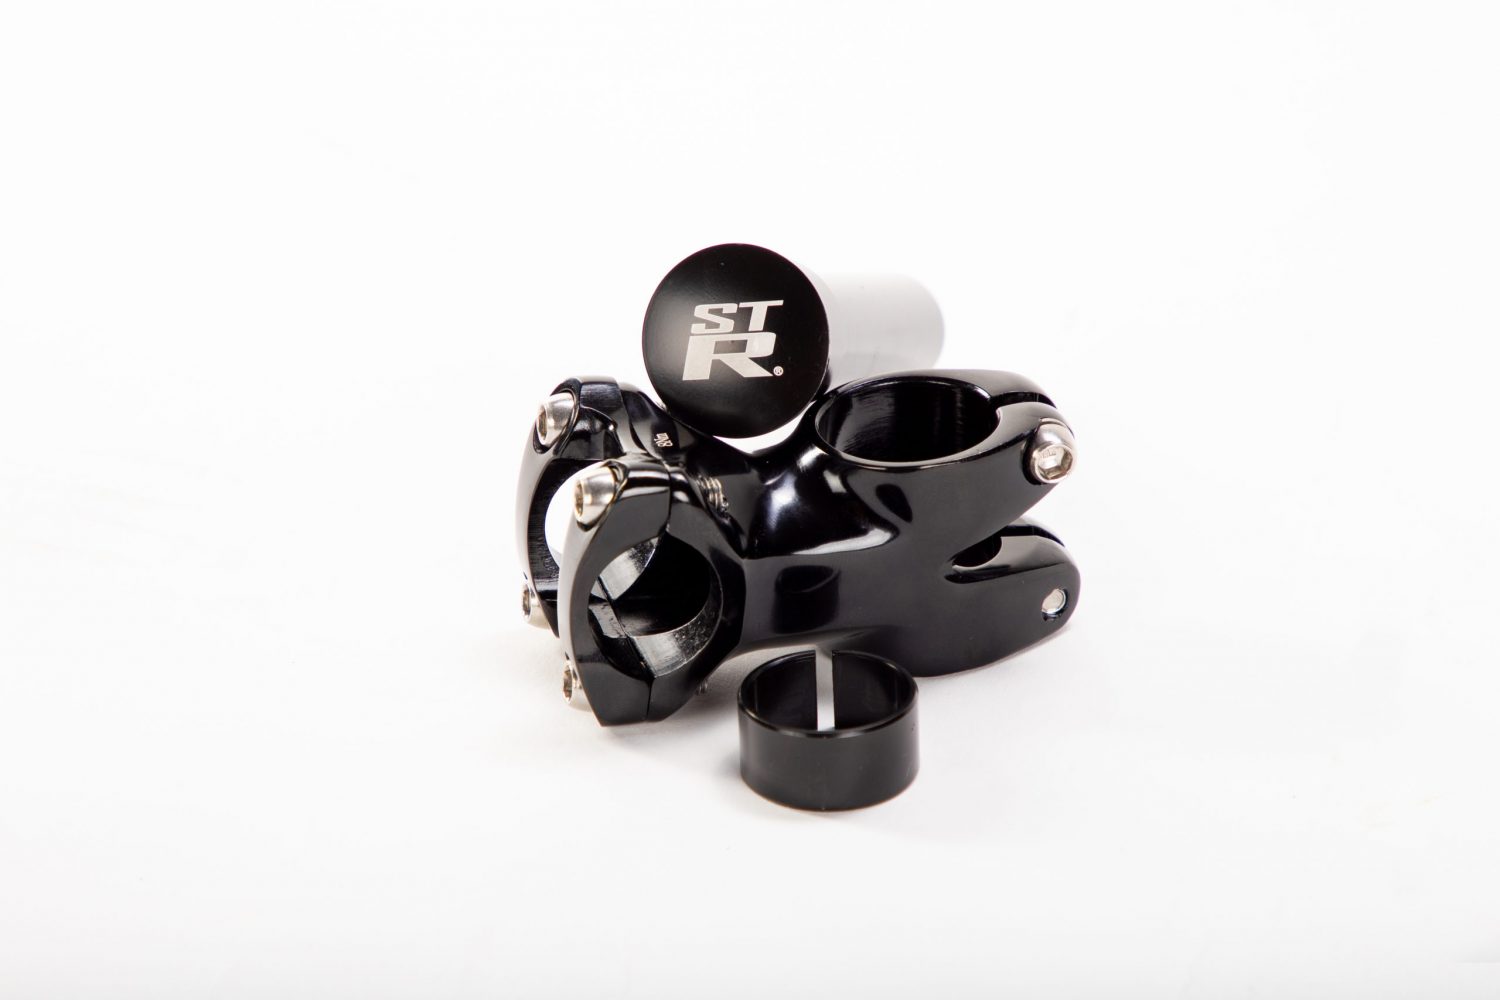 Studio image of a disassembled ST-R Stem Adapter